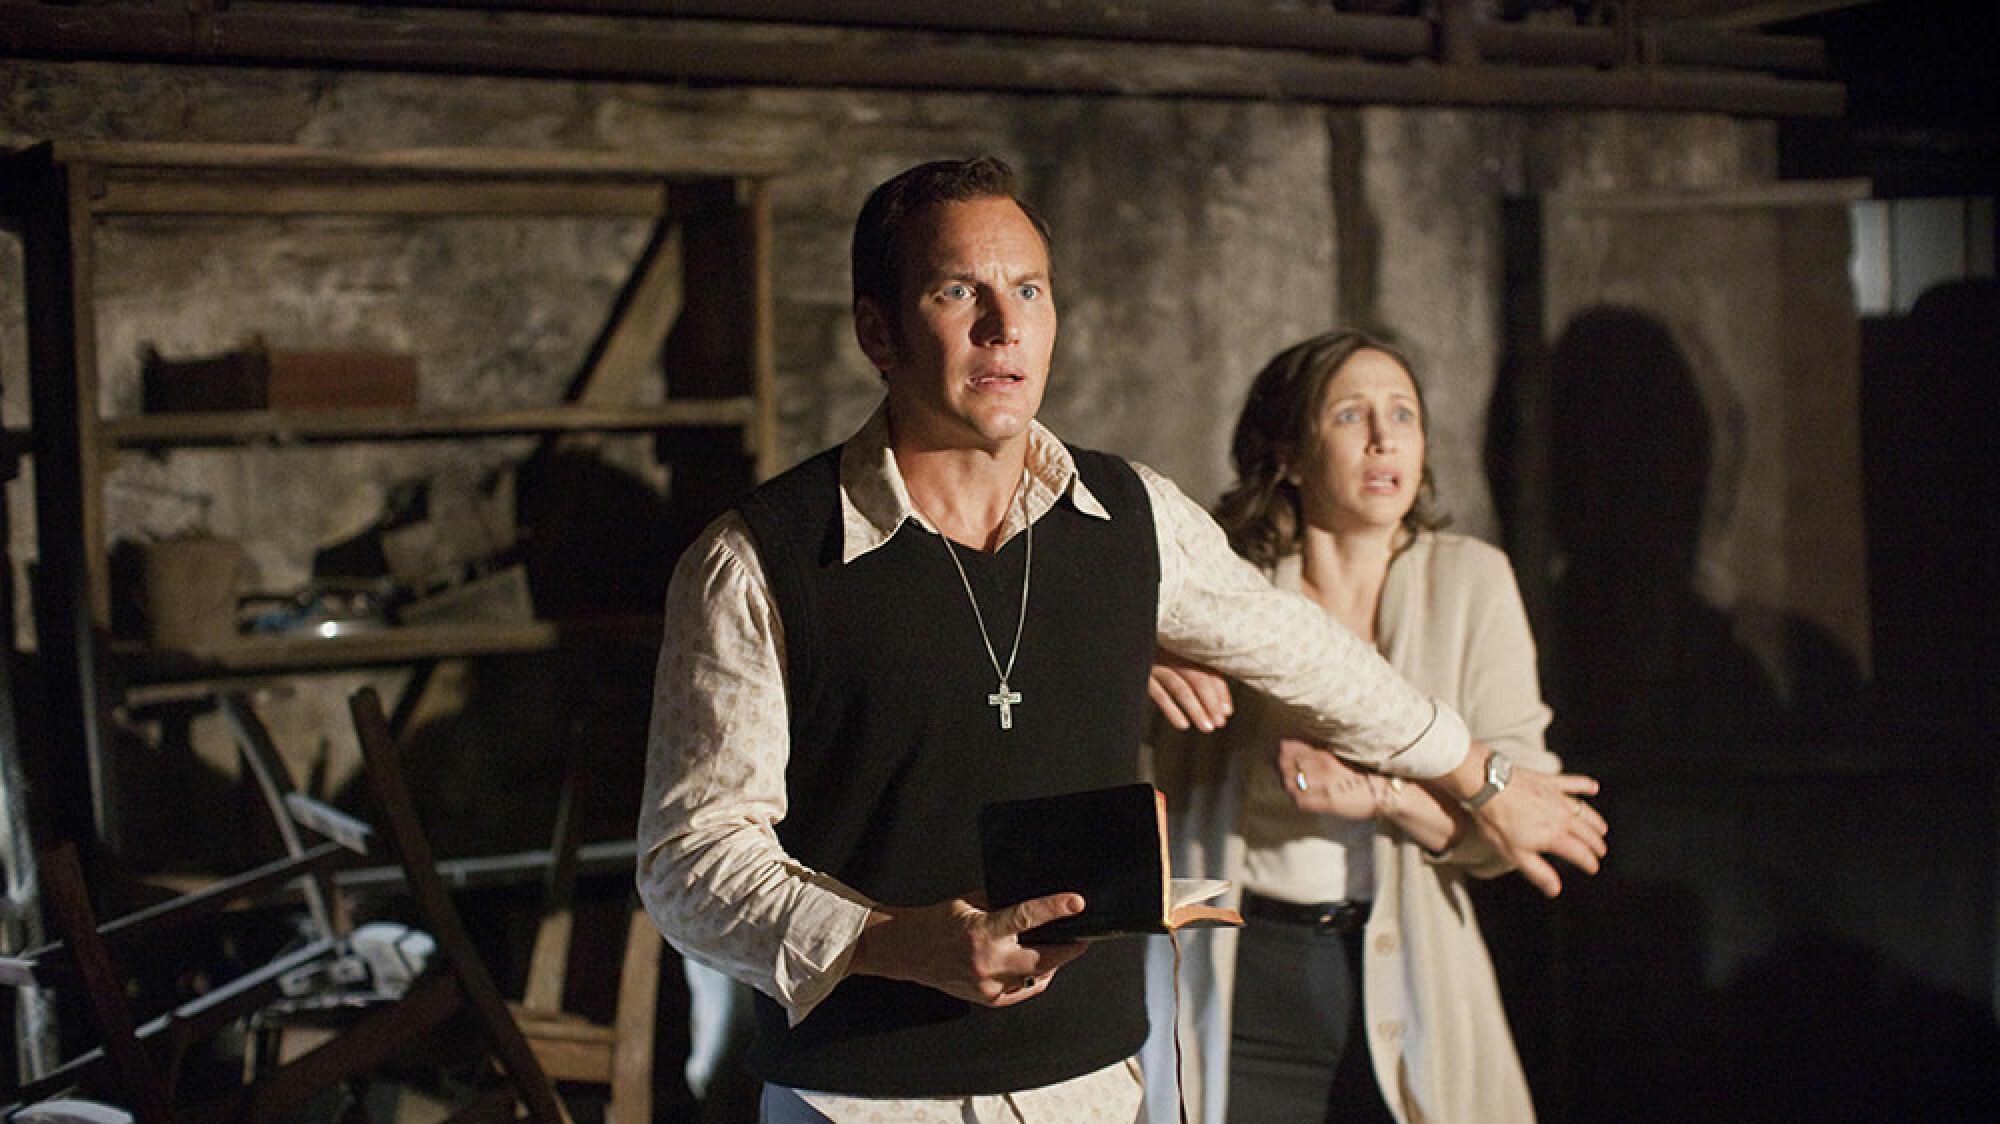 A man with a cross around his neck stands next to a woman in a basement, looking scared.